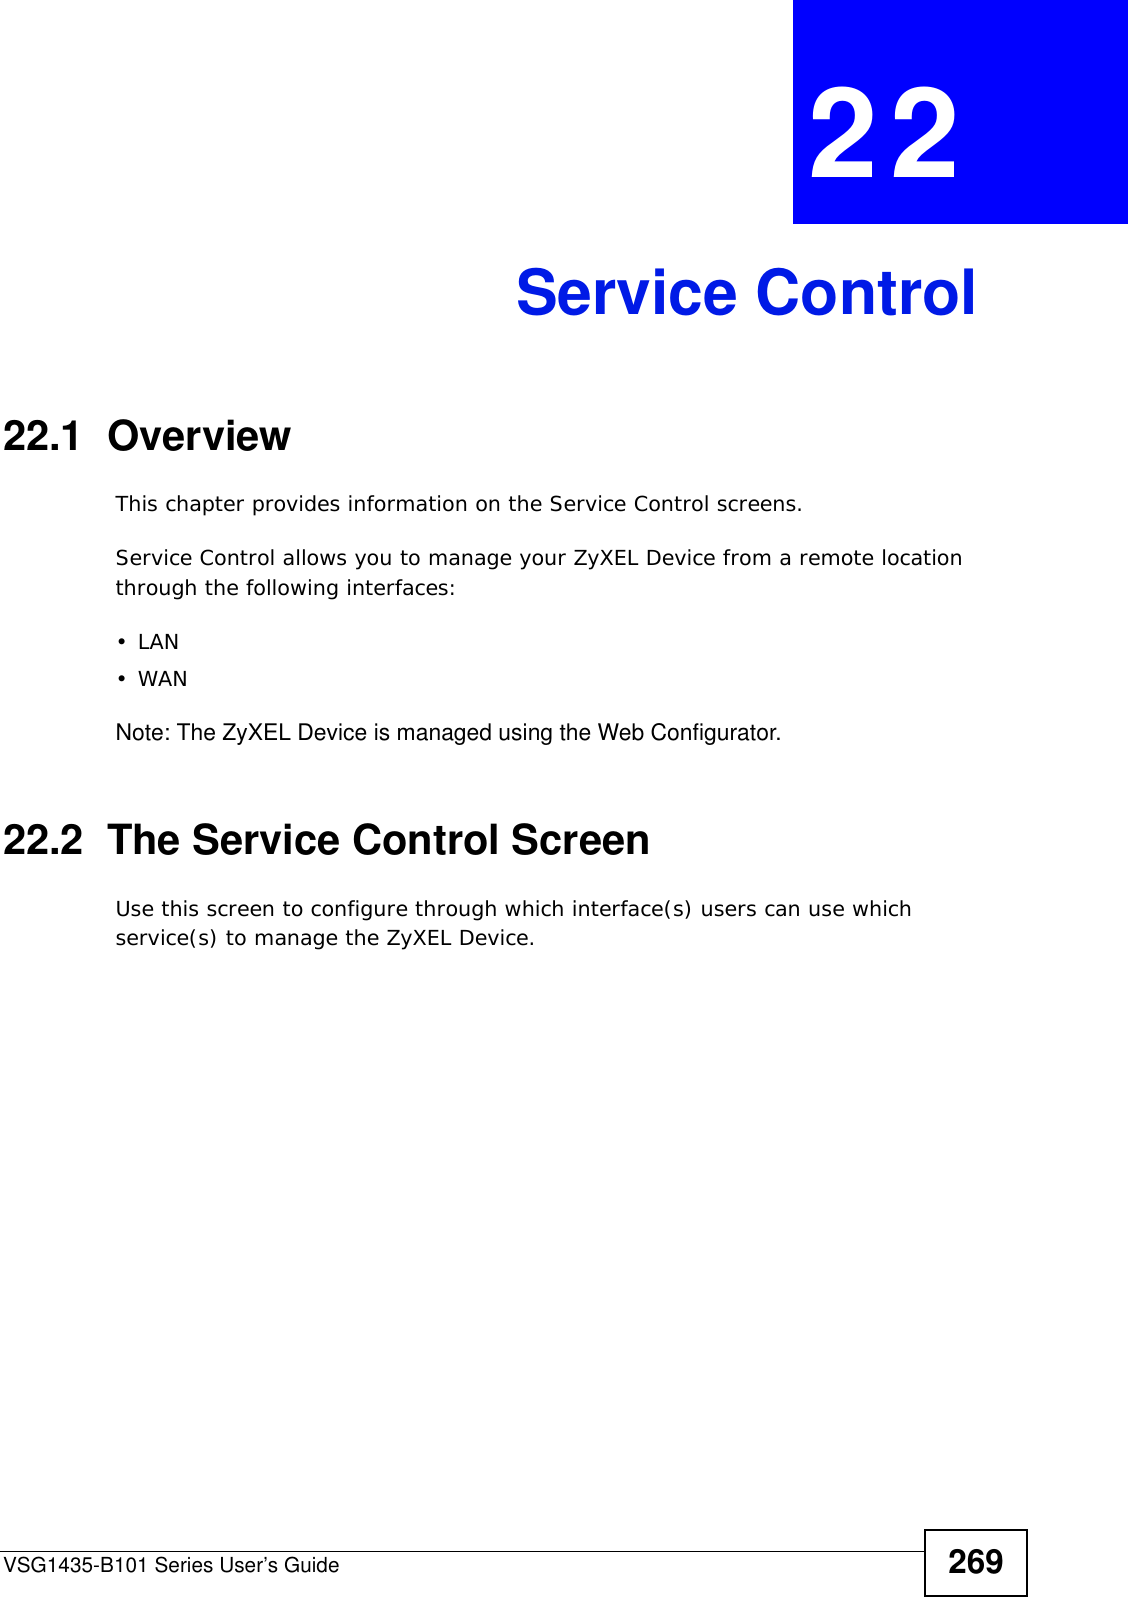 VSG1435-B101 Series User’s Guide 269CHAPTER  22 Service Control22.1  OverviewThis chapter provides information on the Service Control screens. Service Control allows you to manage your ZyXEL Device from a remote location through the following interfaces:•LAN•WANNote: The ZyXEL Device is managed using the Web Configurator.22.2  The Service Control ScreenUse this screen to configure through which interface(s) users can use which service(s) to manage the ZyXEL Device.